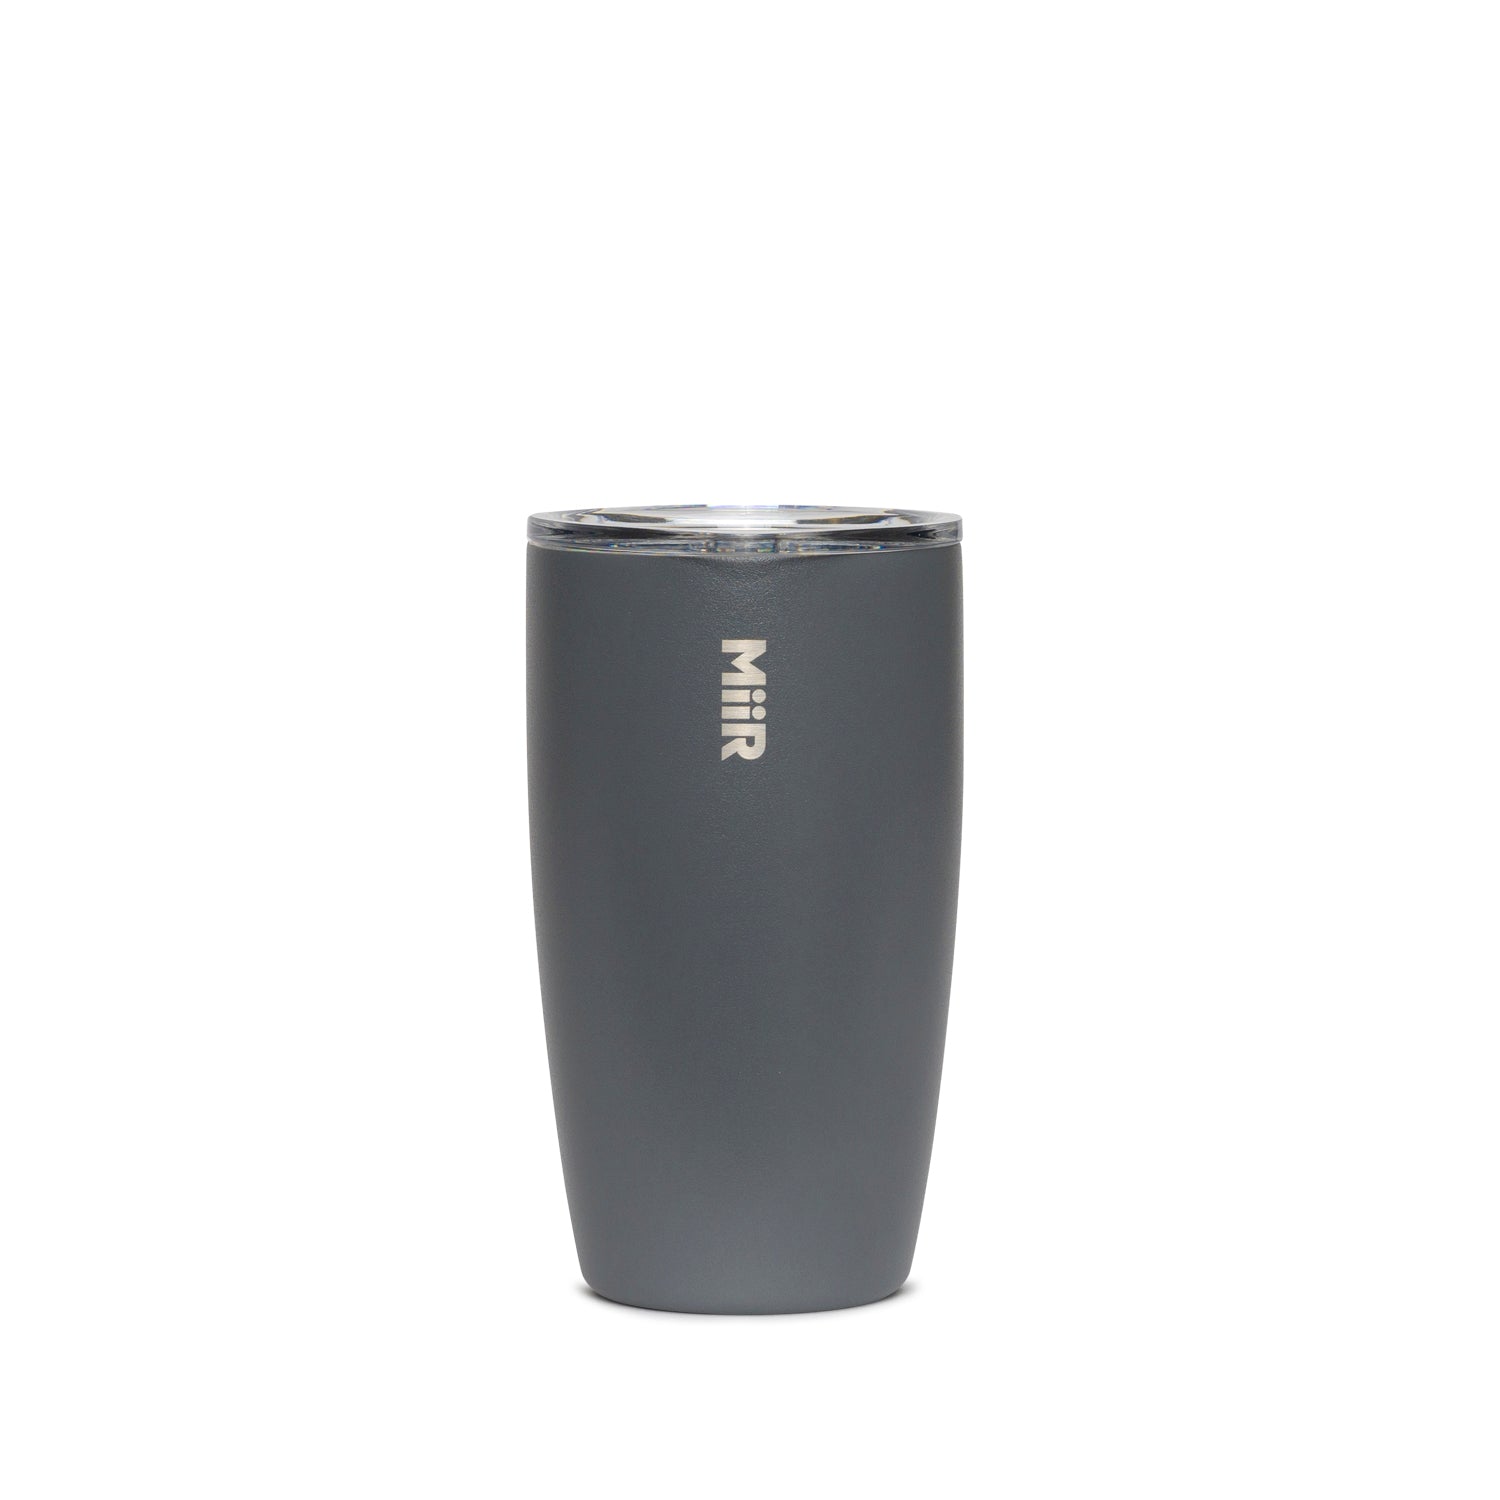 Corkcicle Sparkle 16 Ounce Coffee Mug Triple Insulated  Stainless Steel Cup with Clear Lid and Silicone Bottom for Hot Drinks,  Matte Black: Coffee Cups & Mugs